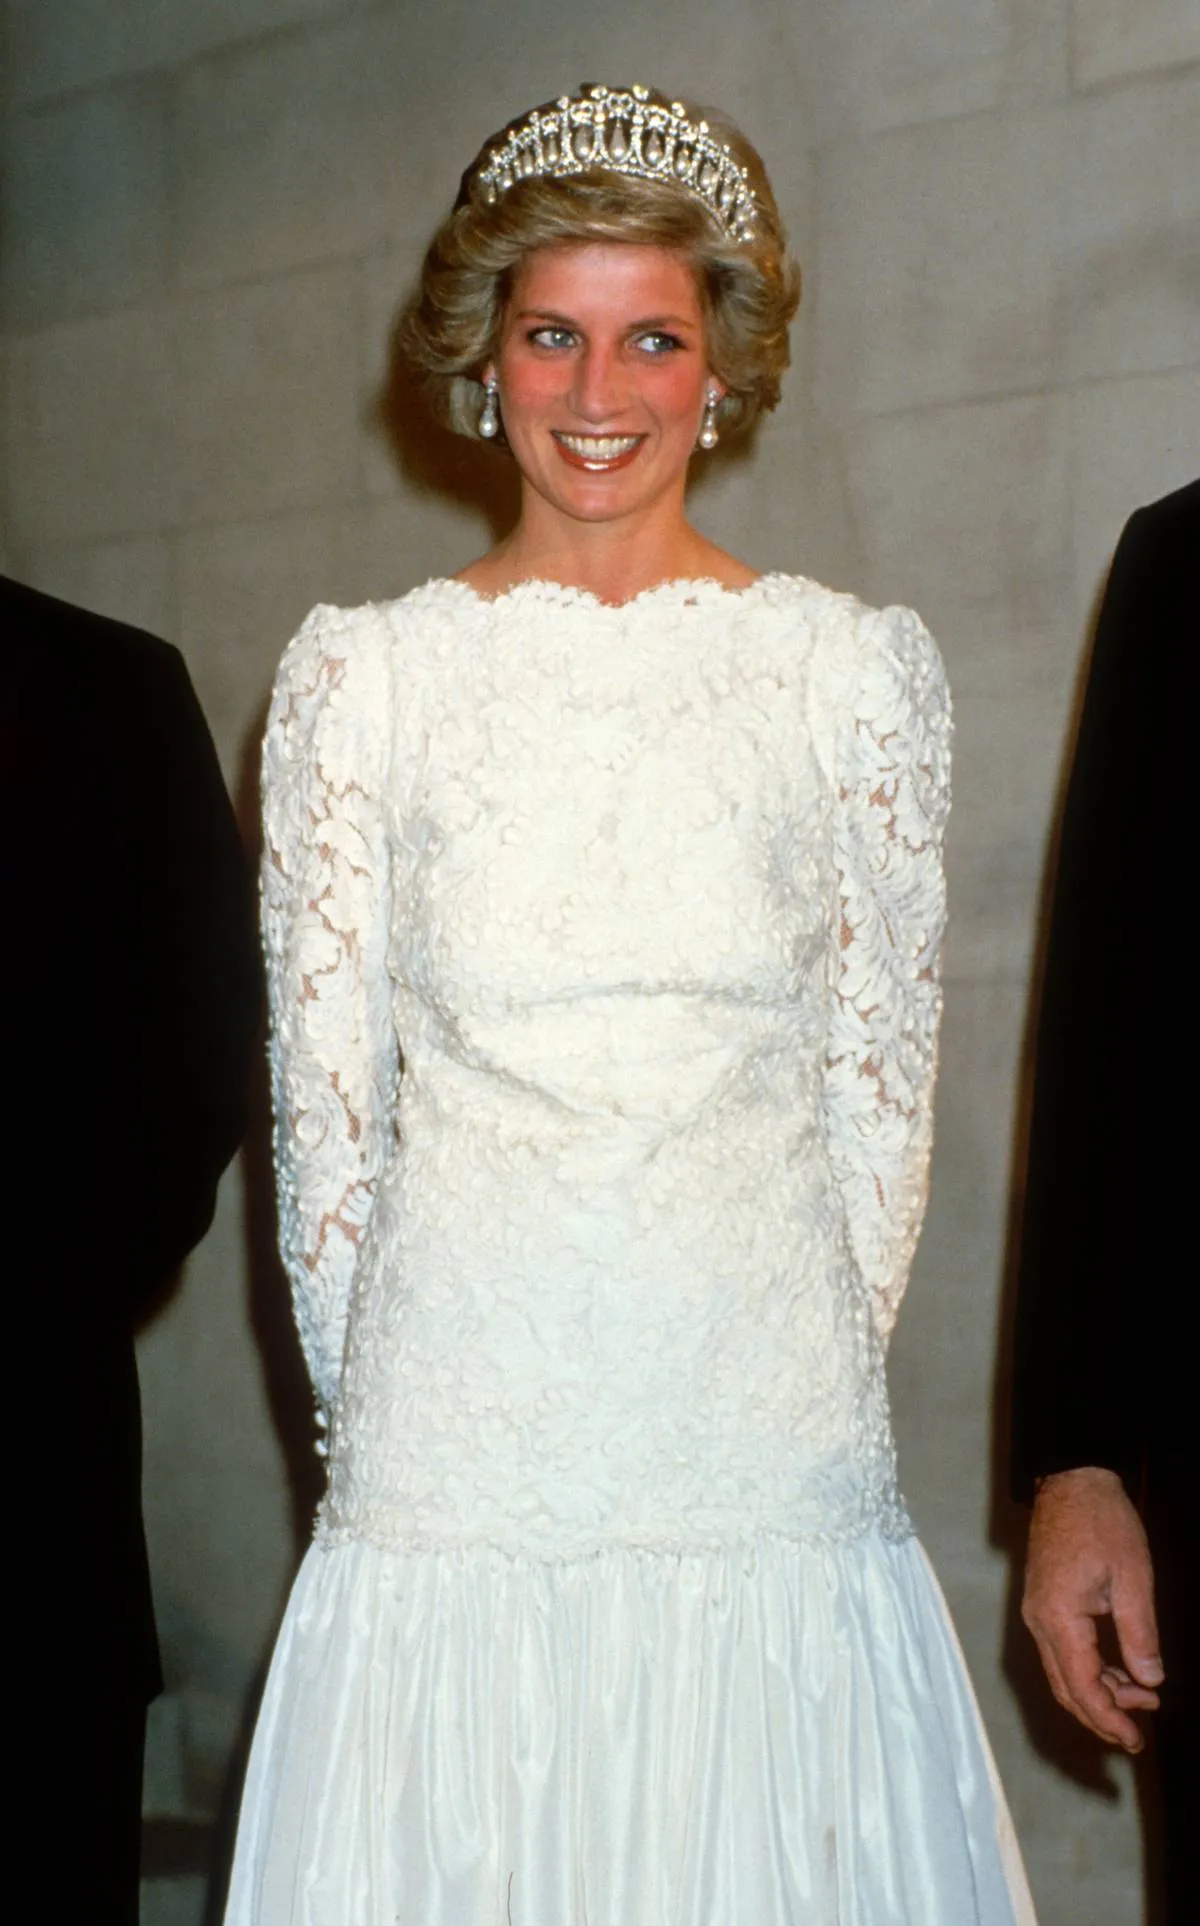 <p>The <a href="https://www.thecourtjeweller.com/2019/02/queen-marys-lovers-knot-tiara.html" rel="noopener noreferrer">Lover's Knot tiara</a>, also known as the Cambridge Lover's Knot, was a favorite of Princess Diana's and has been worn multiple times by Kate Middleton as well. It was lent to Diana on her wedding day by Queen Elizabeth II and returned after her divorce from Prince Charles. </p> <p>The gleaming tiara was created for Queen Mary in 1914 by Garrard and was made from pearls and diamonds already owned by the family. Queen Mary was inspired by her grandmother Princess Augusta of Hesse's tiara and wanted this one made to look just like it.</p>